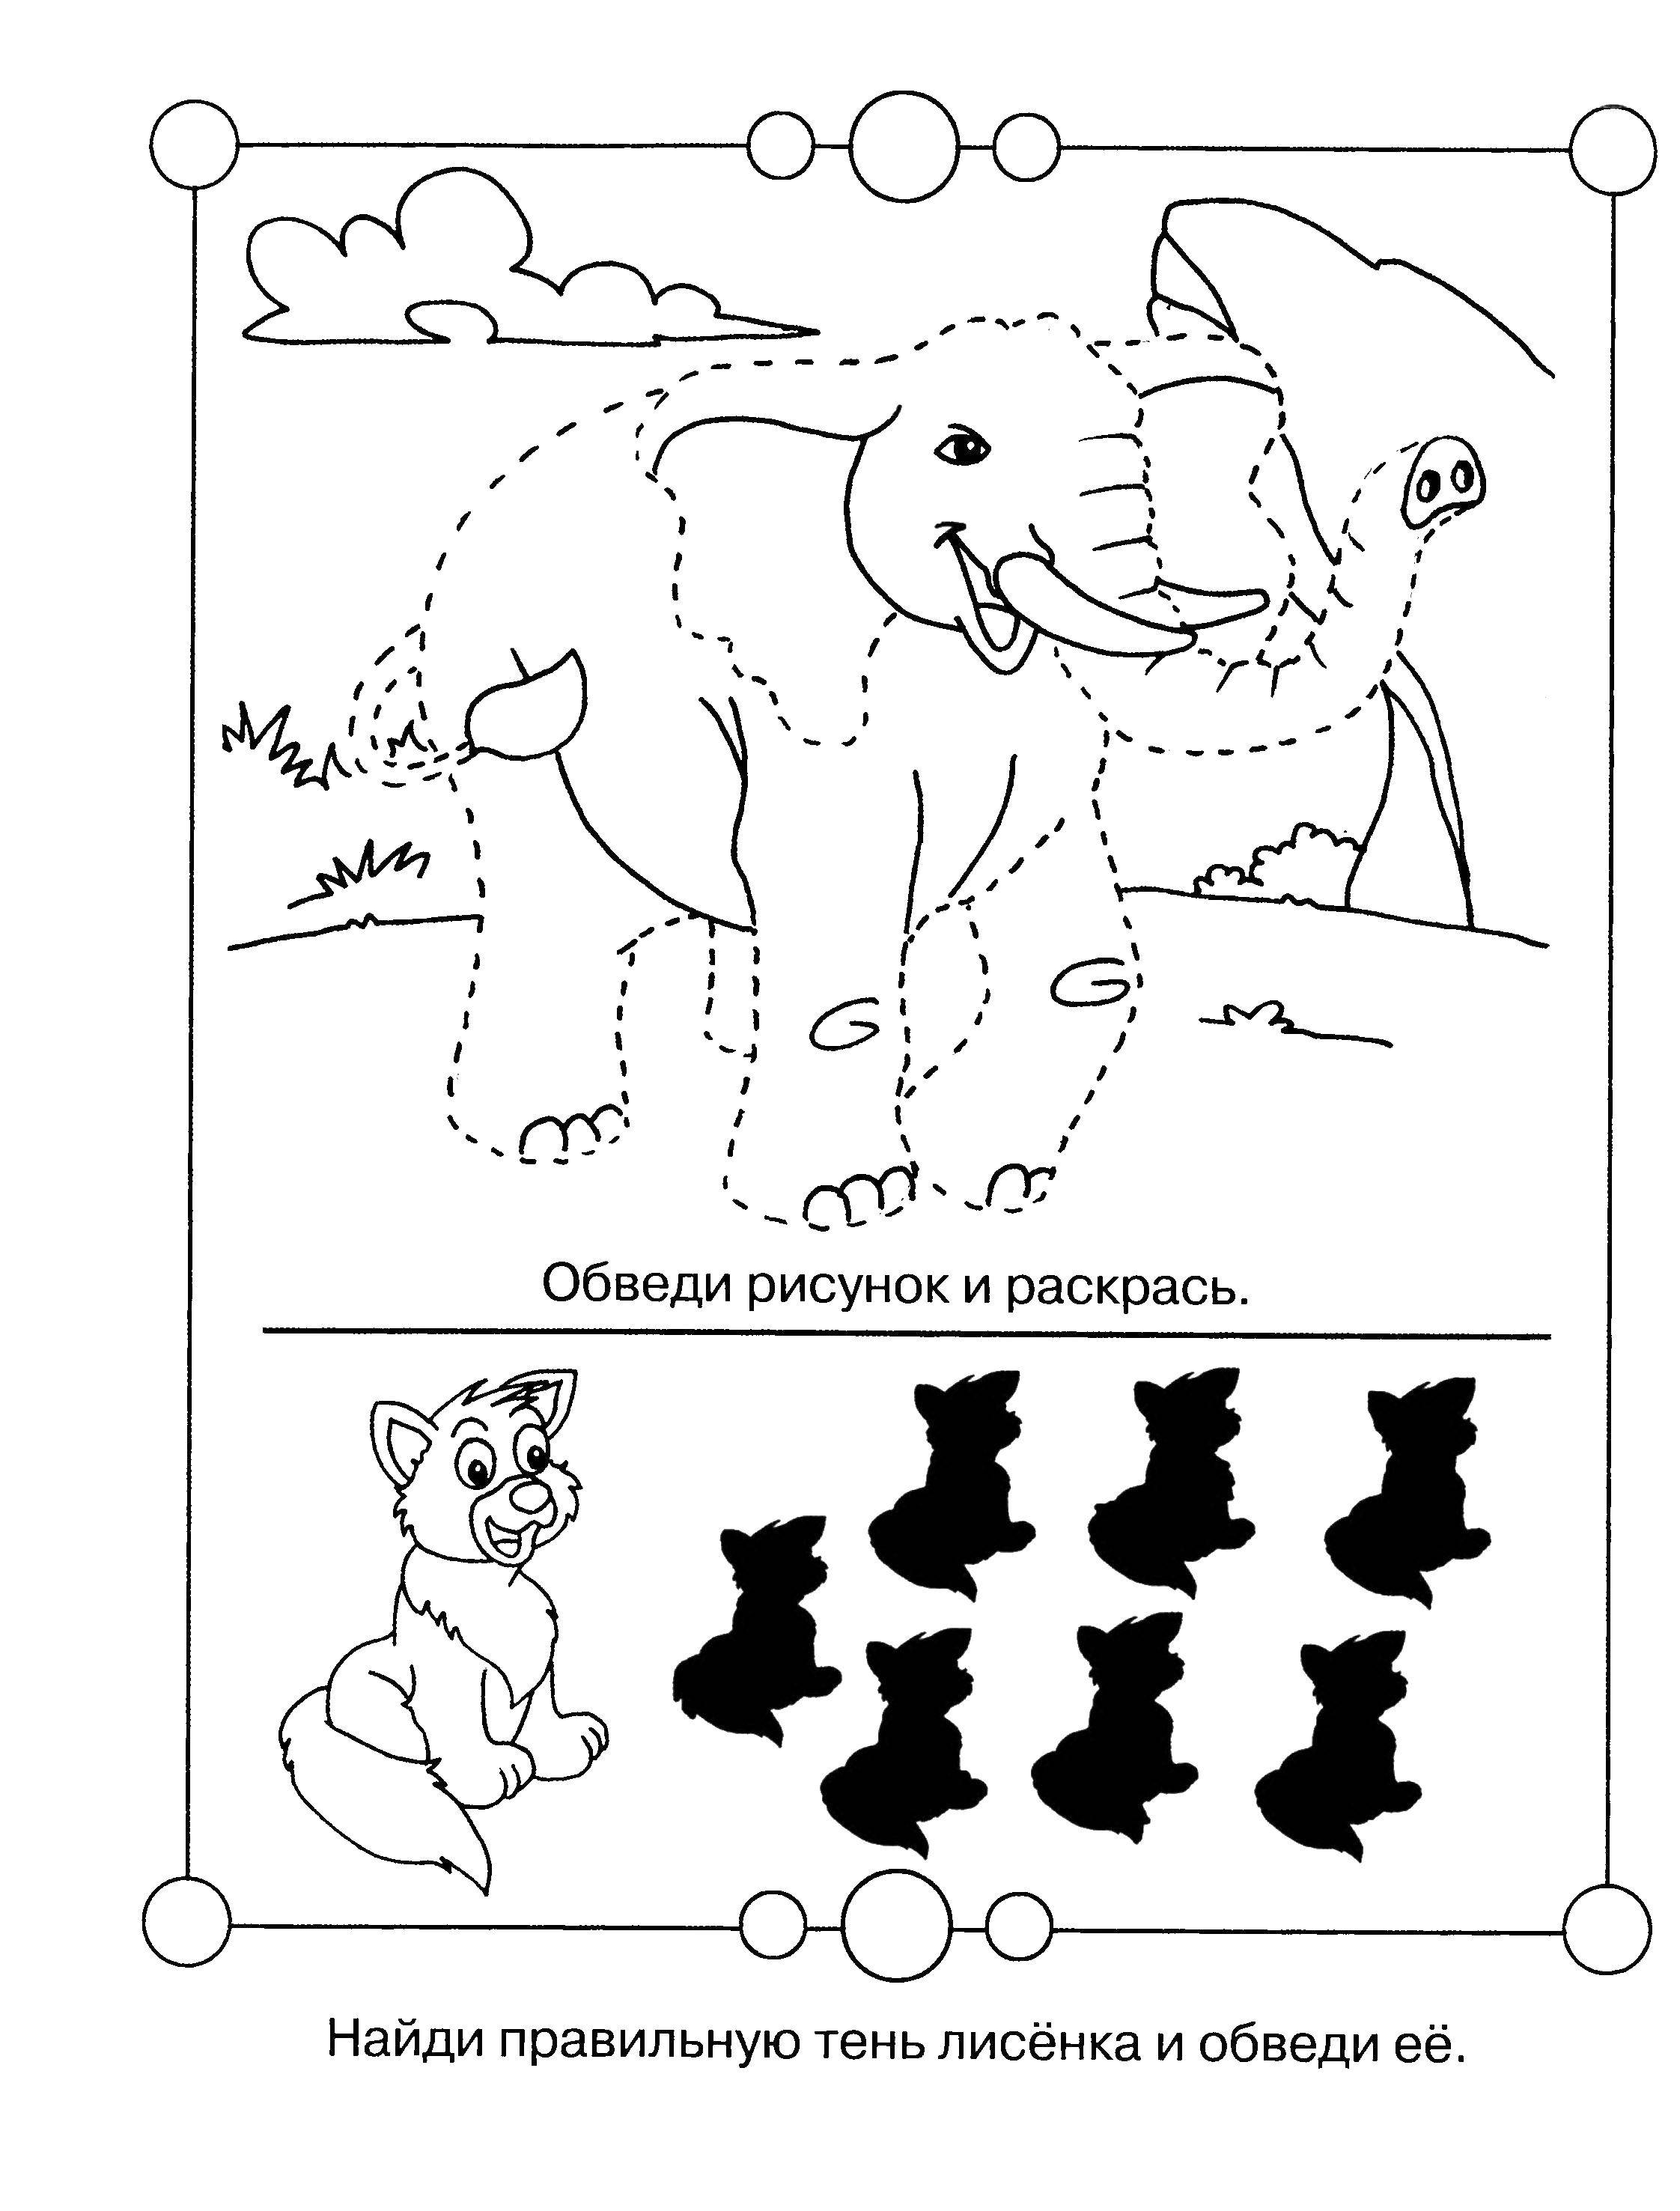 Coloring Circle the pattern and color. Category riddles for kids. Tags:  Teaching coloring, logic.